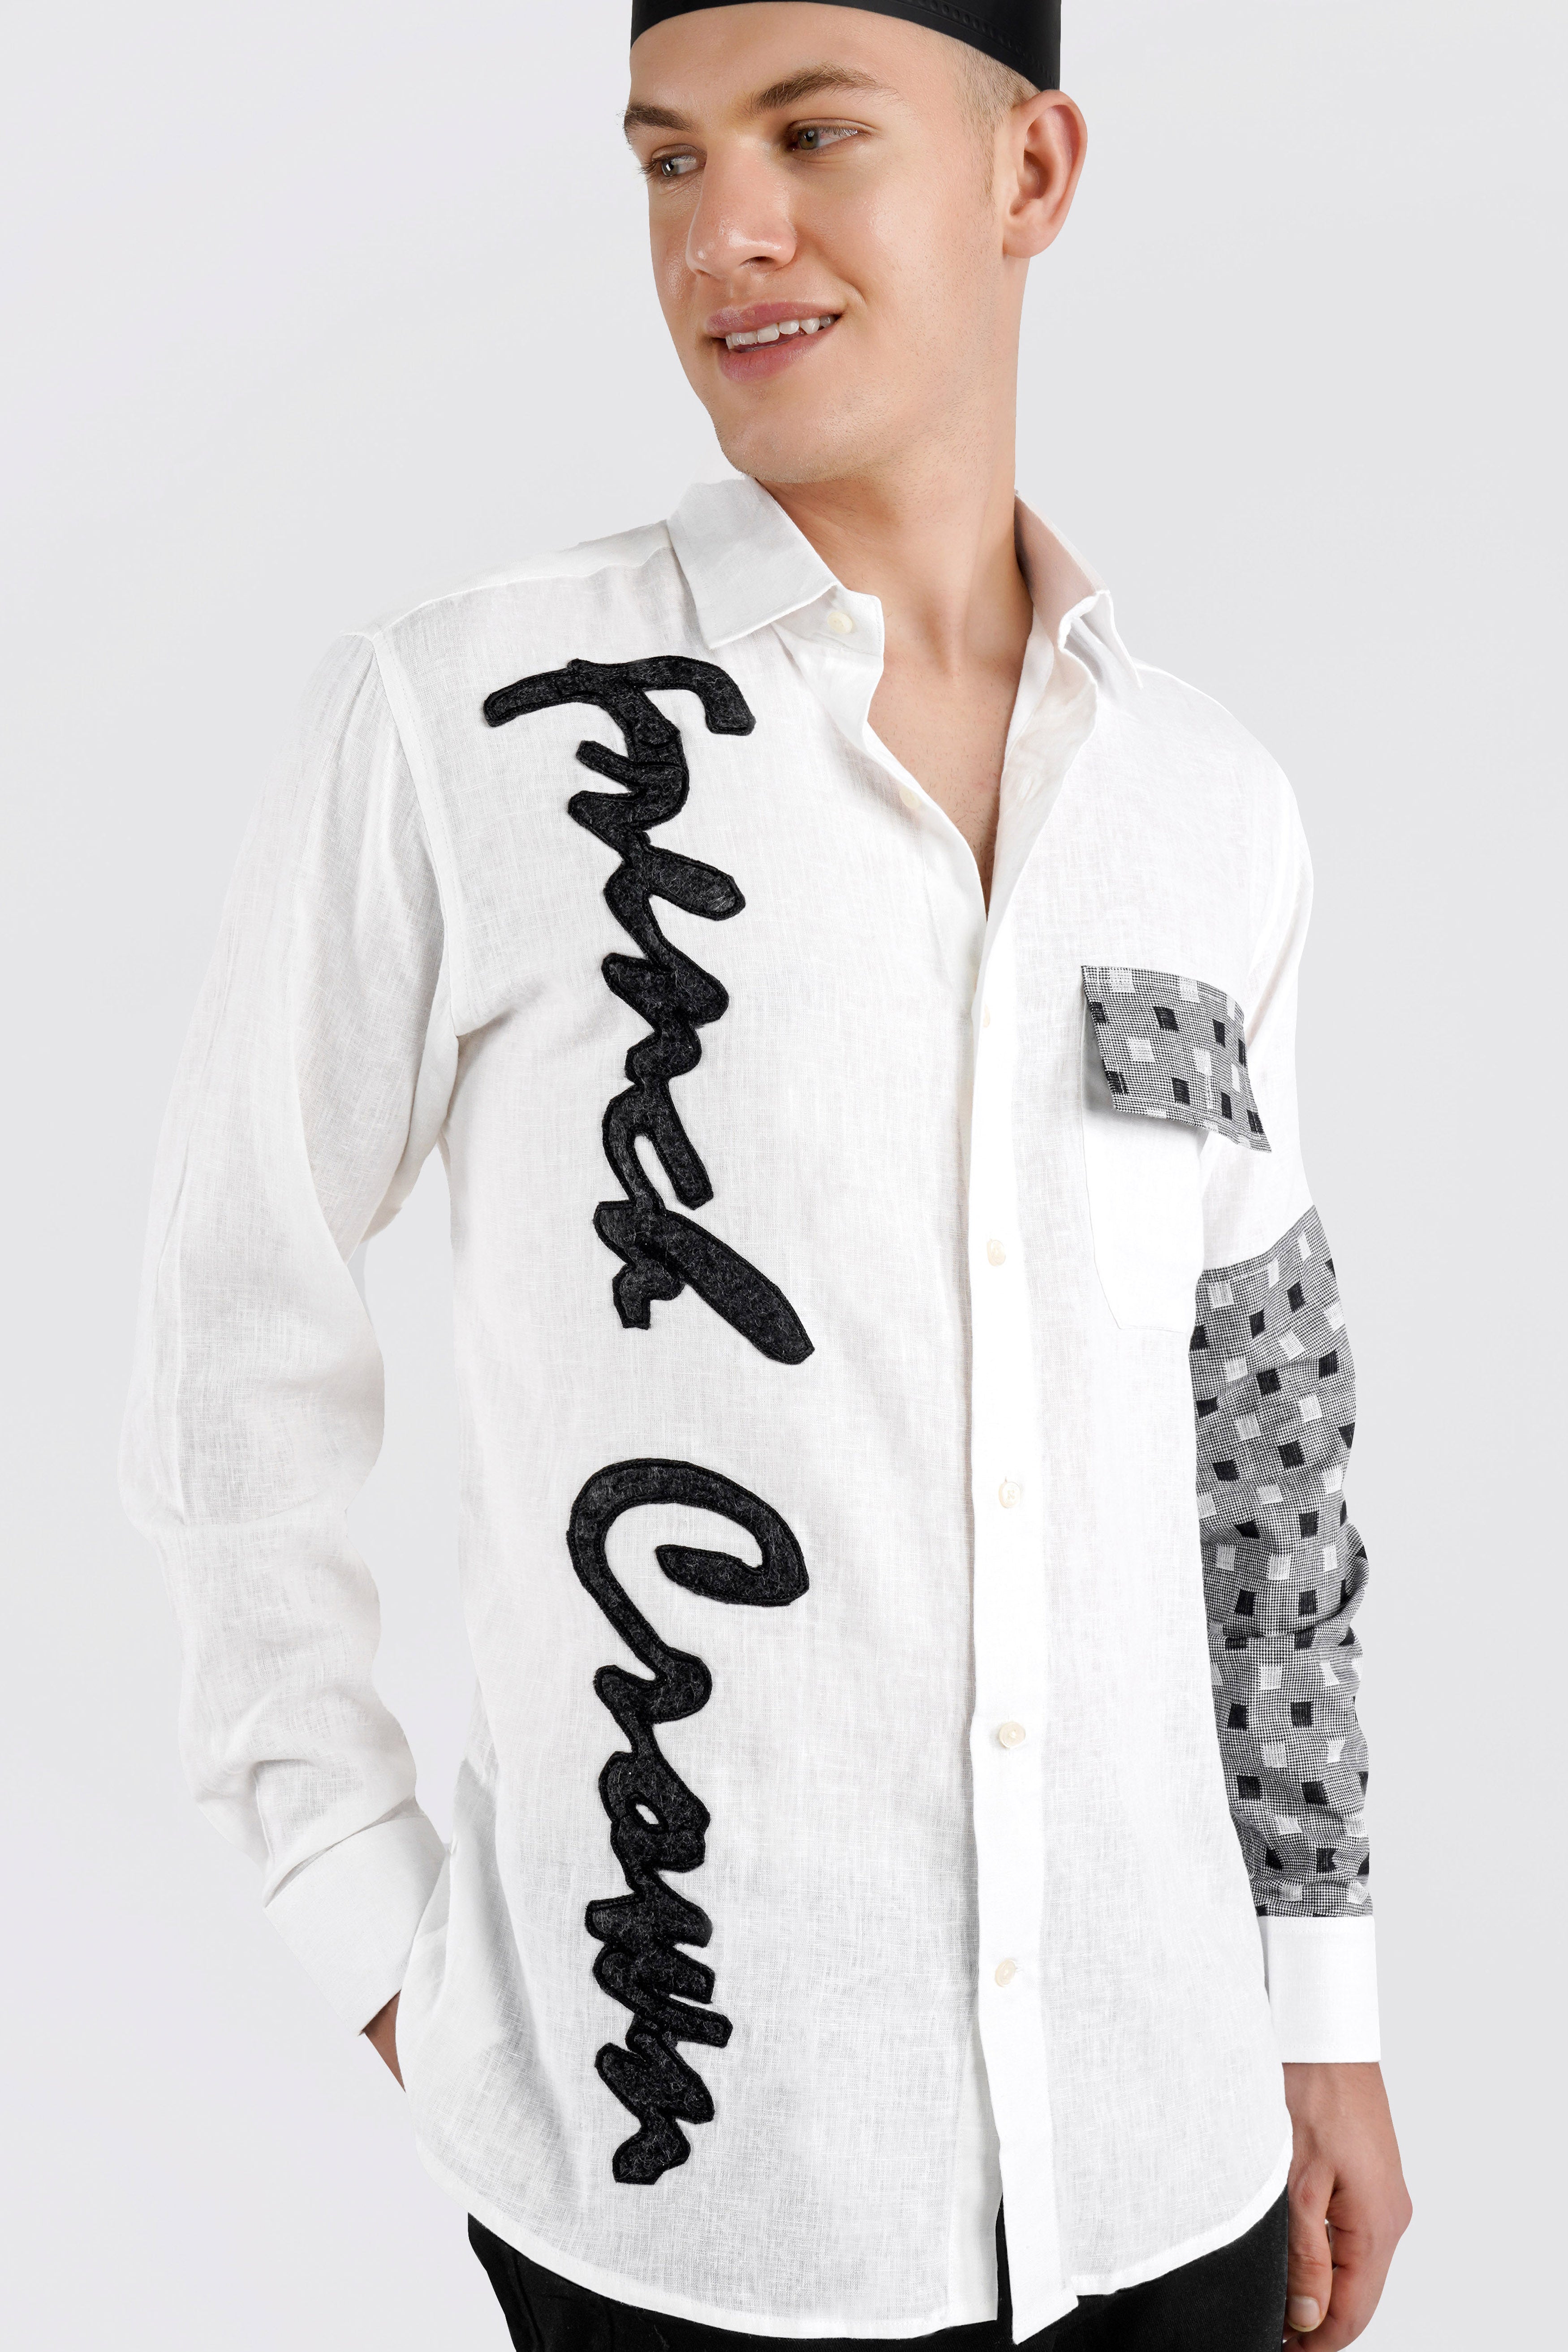 Bright White with Black French Crown Embroidered Luxurious Linen Designer Shirt